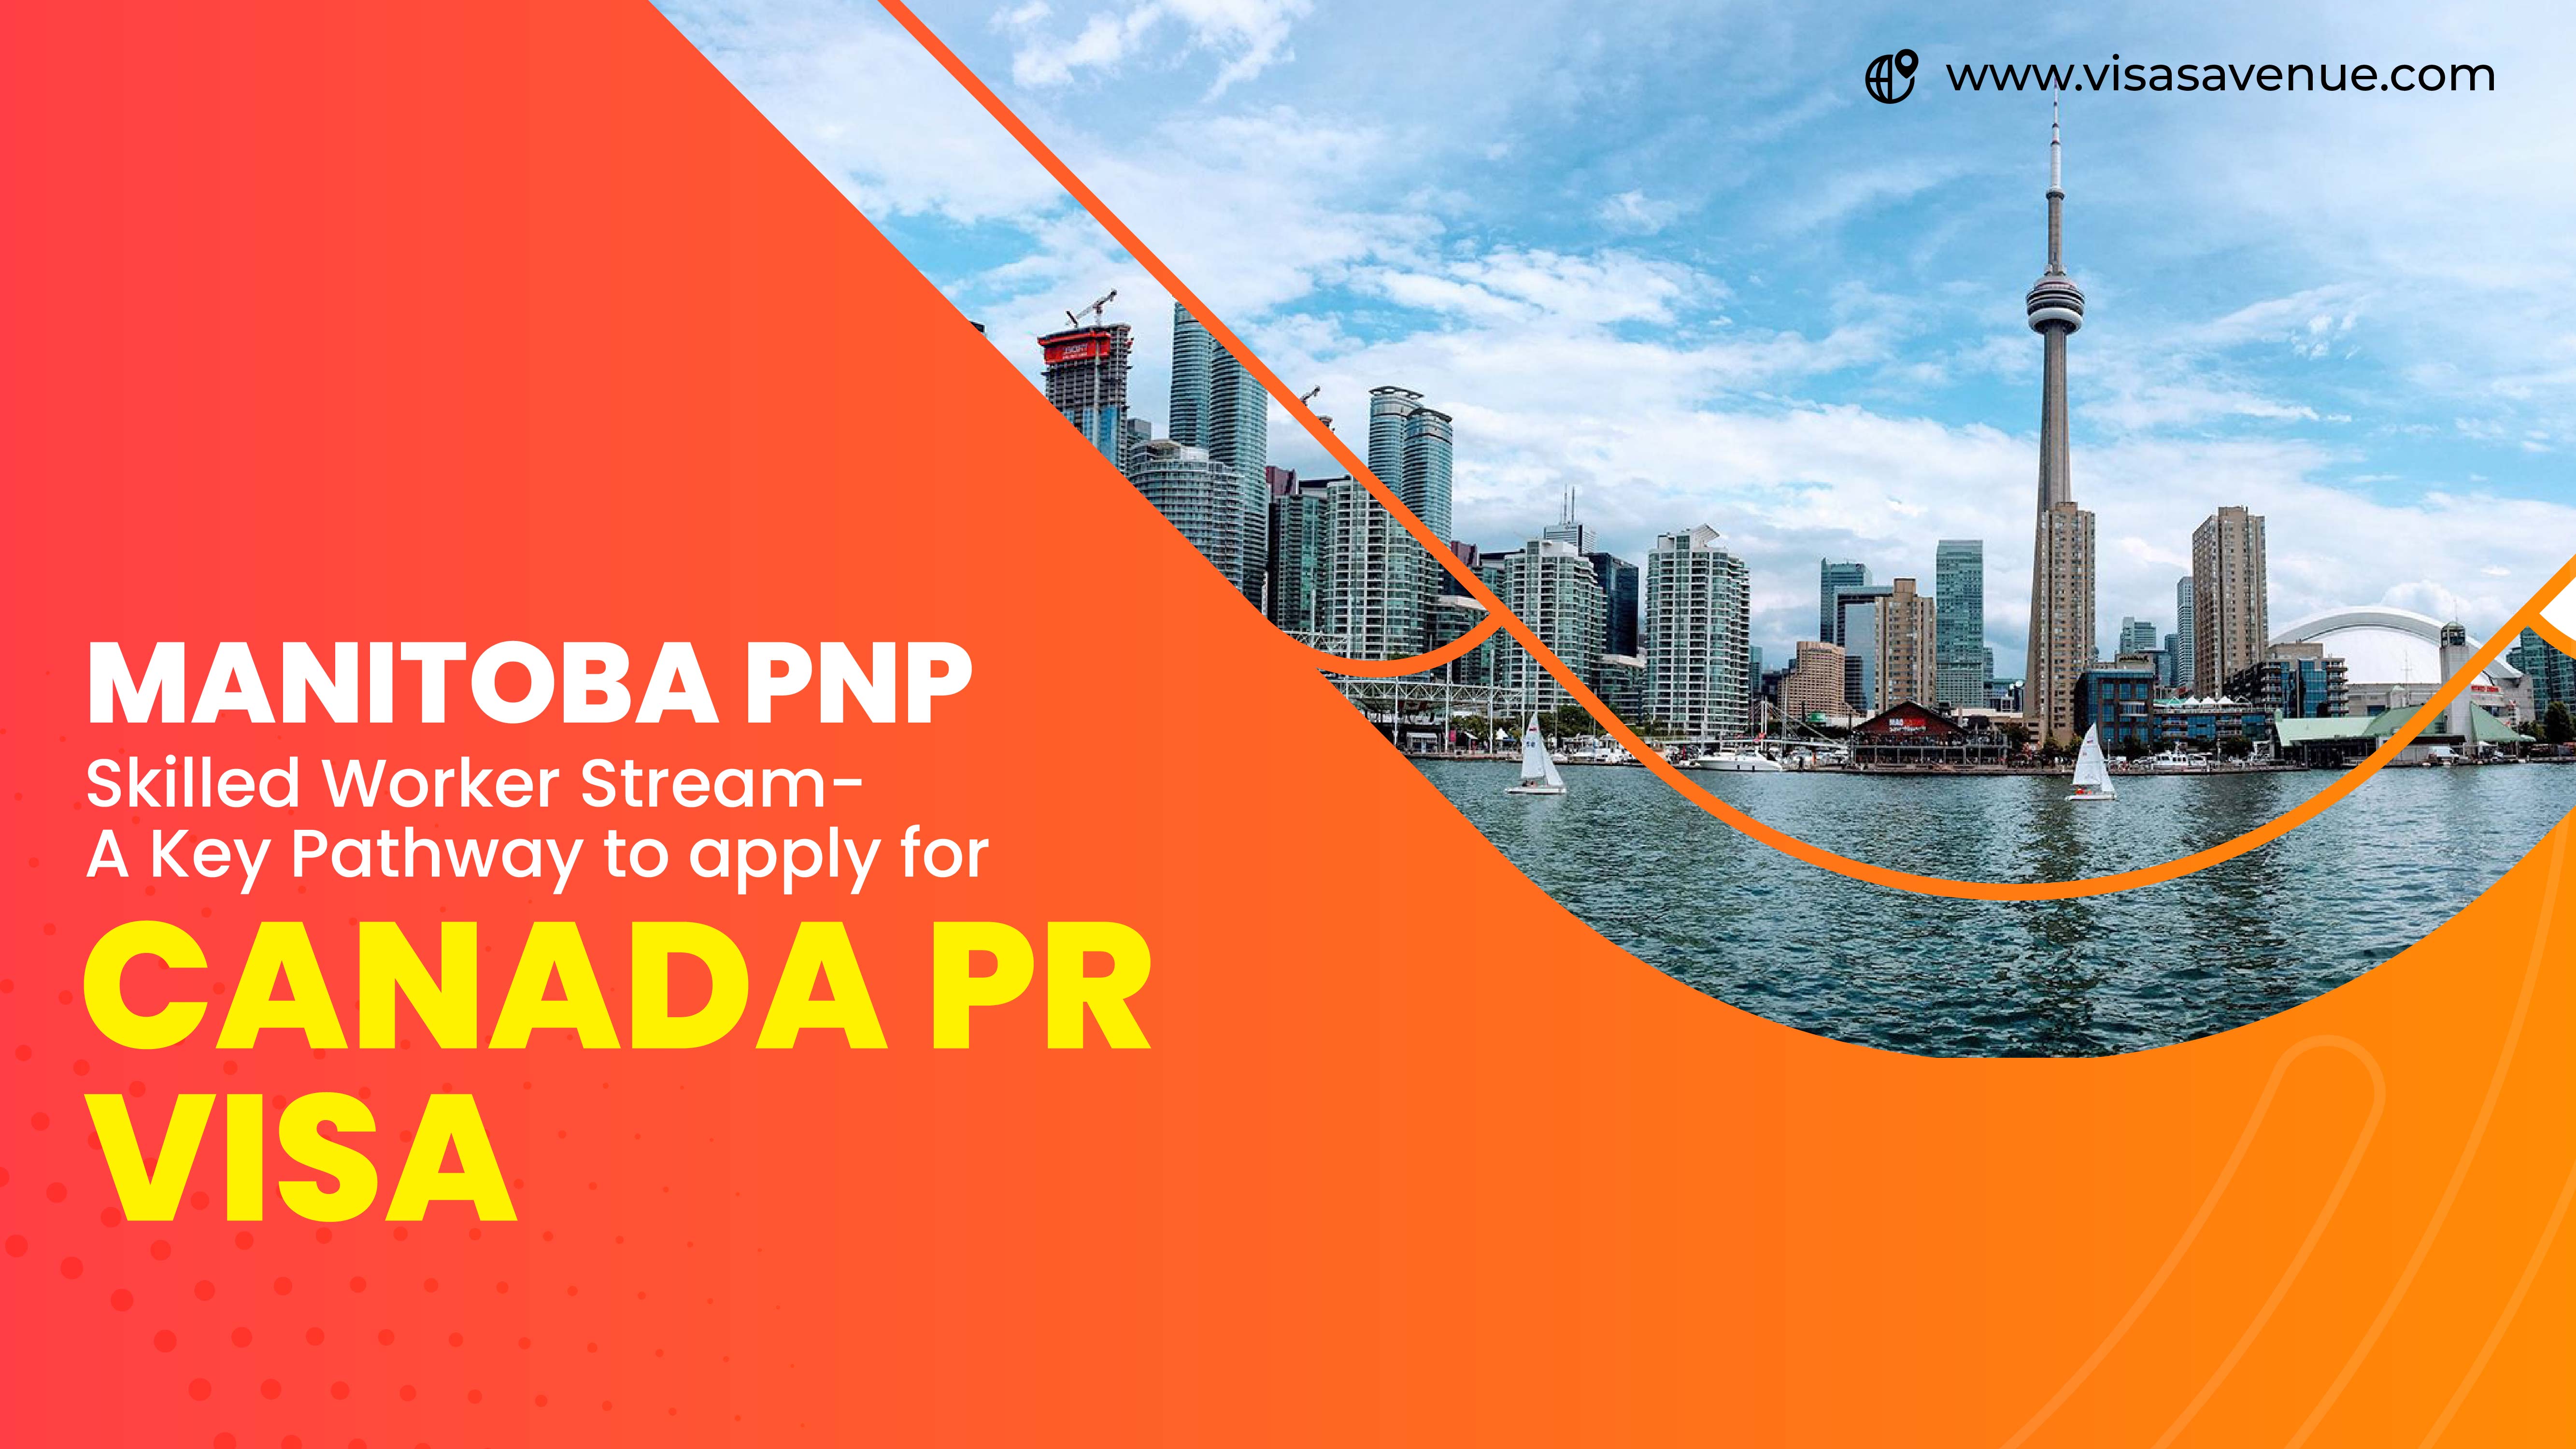 Manitoba PNP- Skilled Worker Stream- a Key Pathway to apply for Canada PR Visa